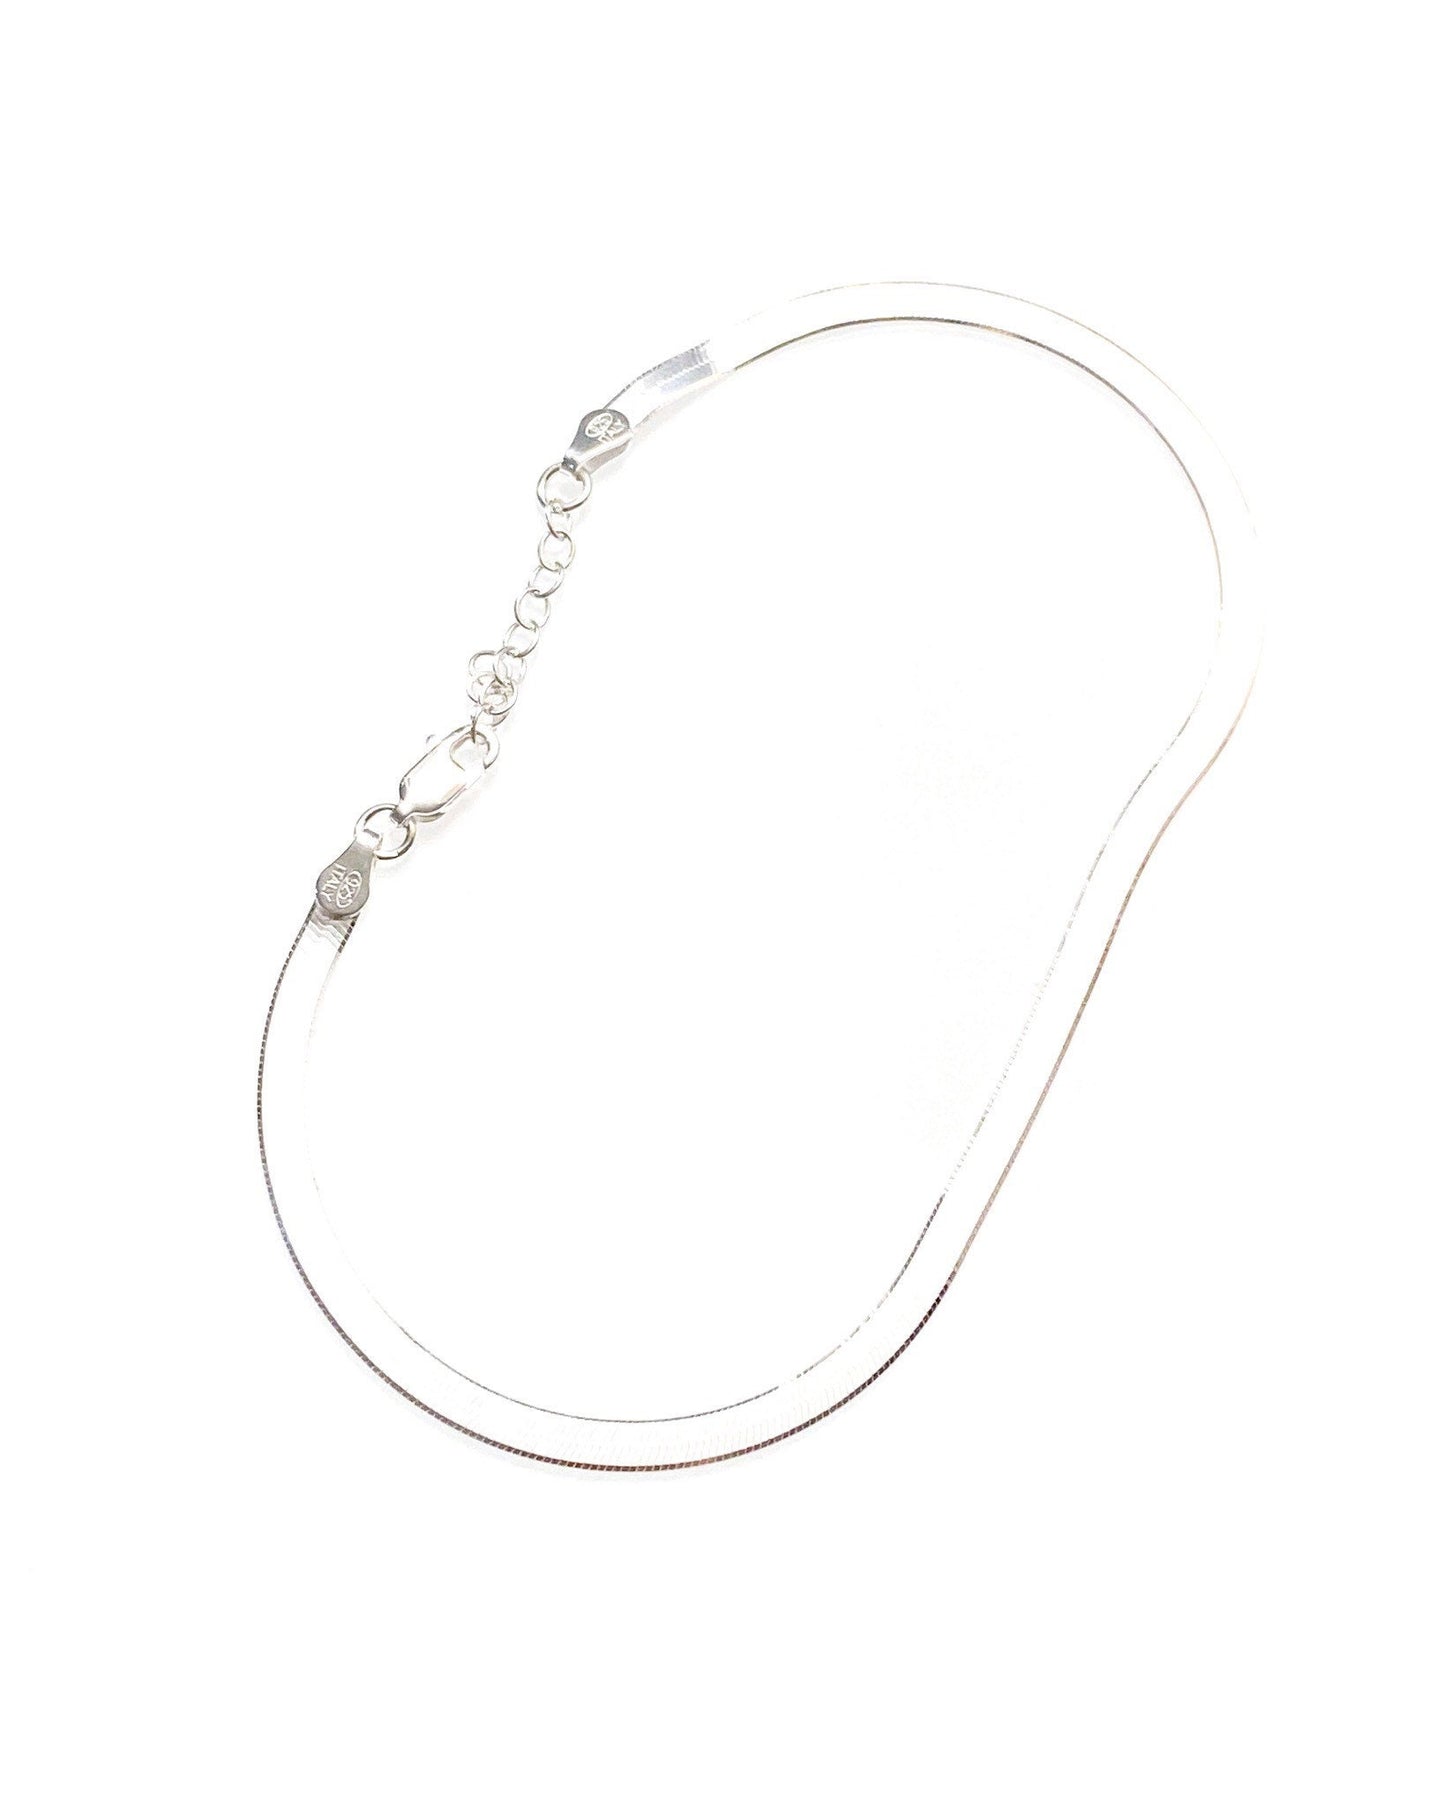 Herringbone anklet (sterling silver or gold plated)